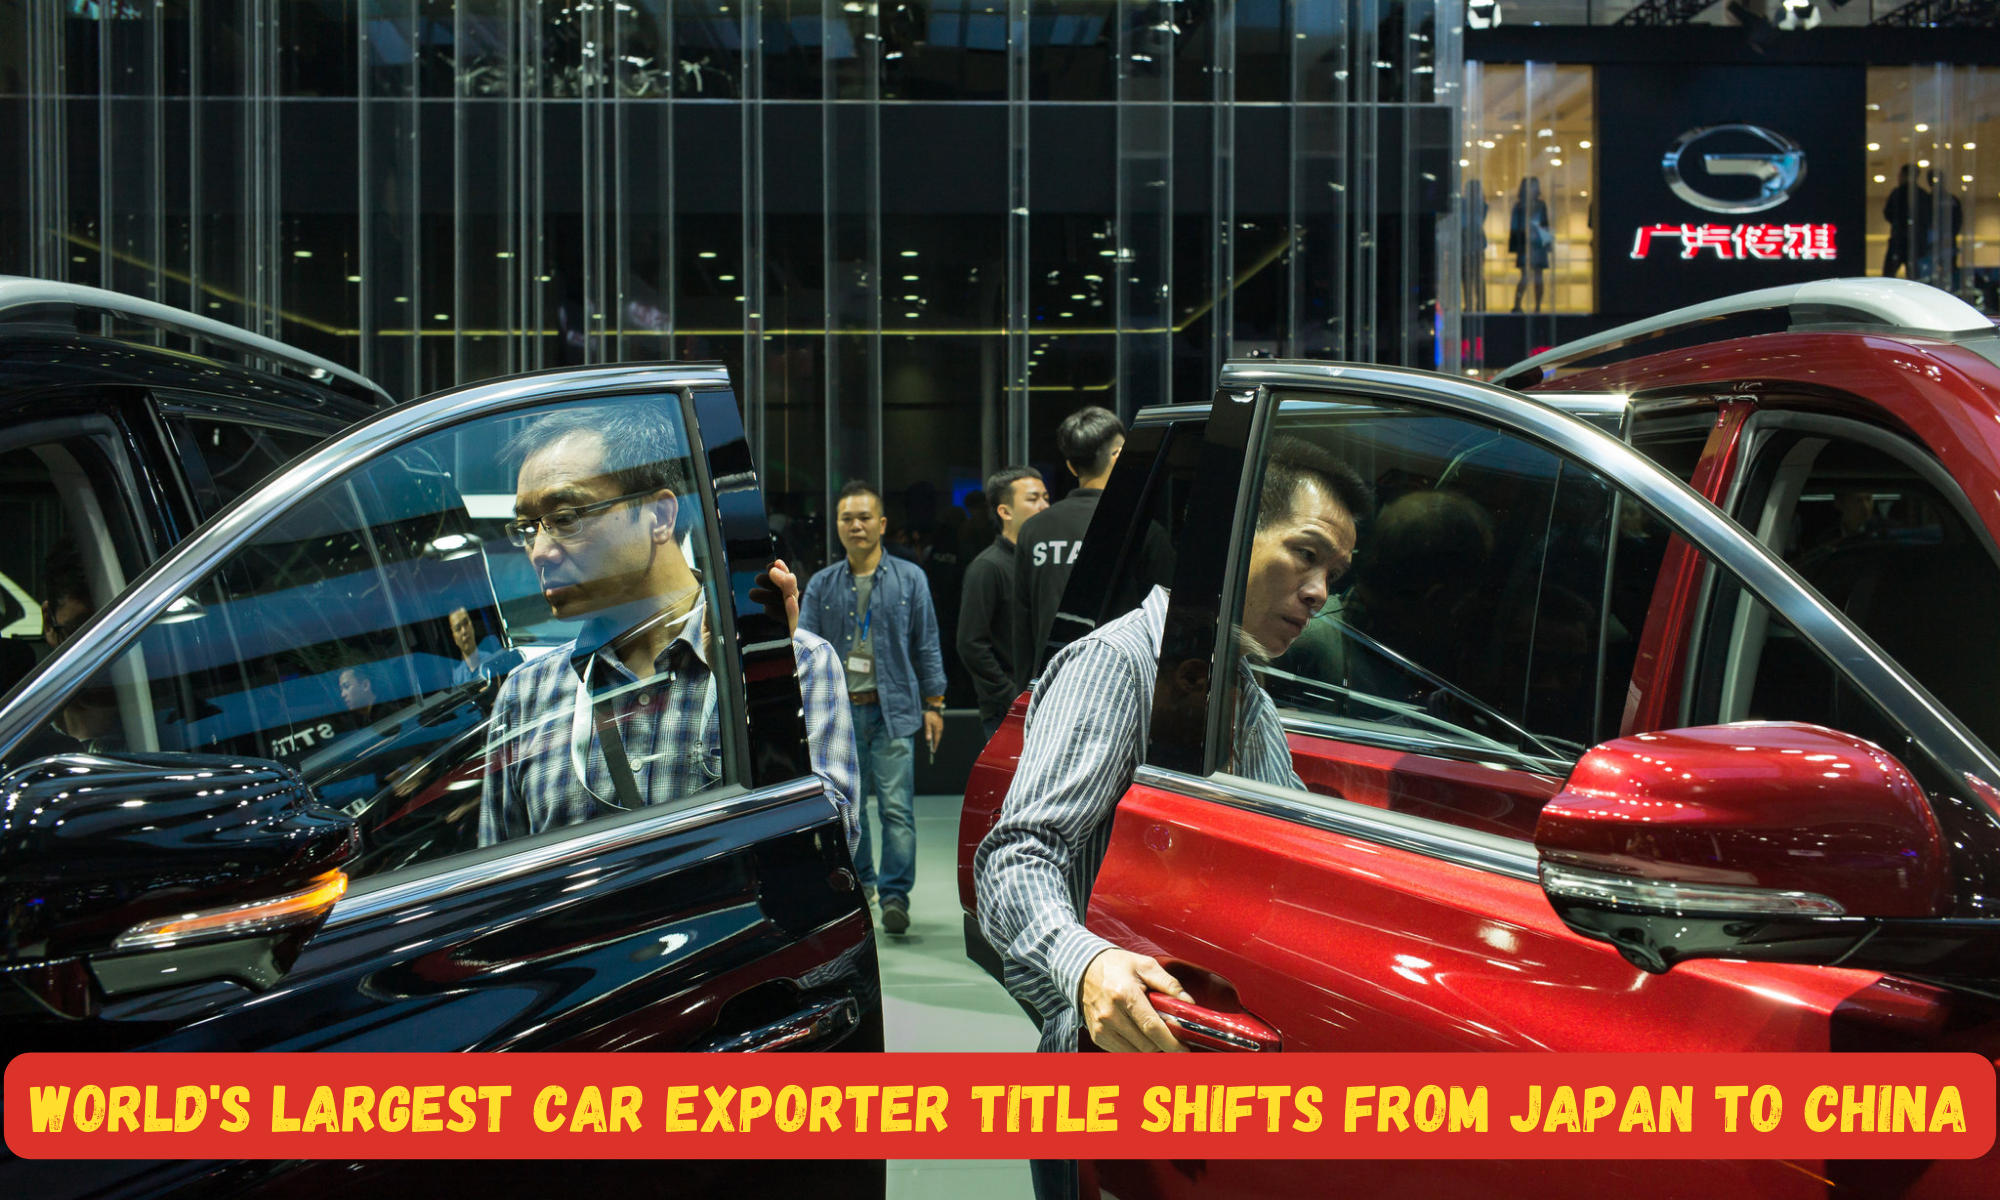 World's Largest Car Exporter Title Shifts from Japan to China